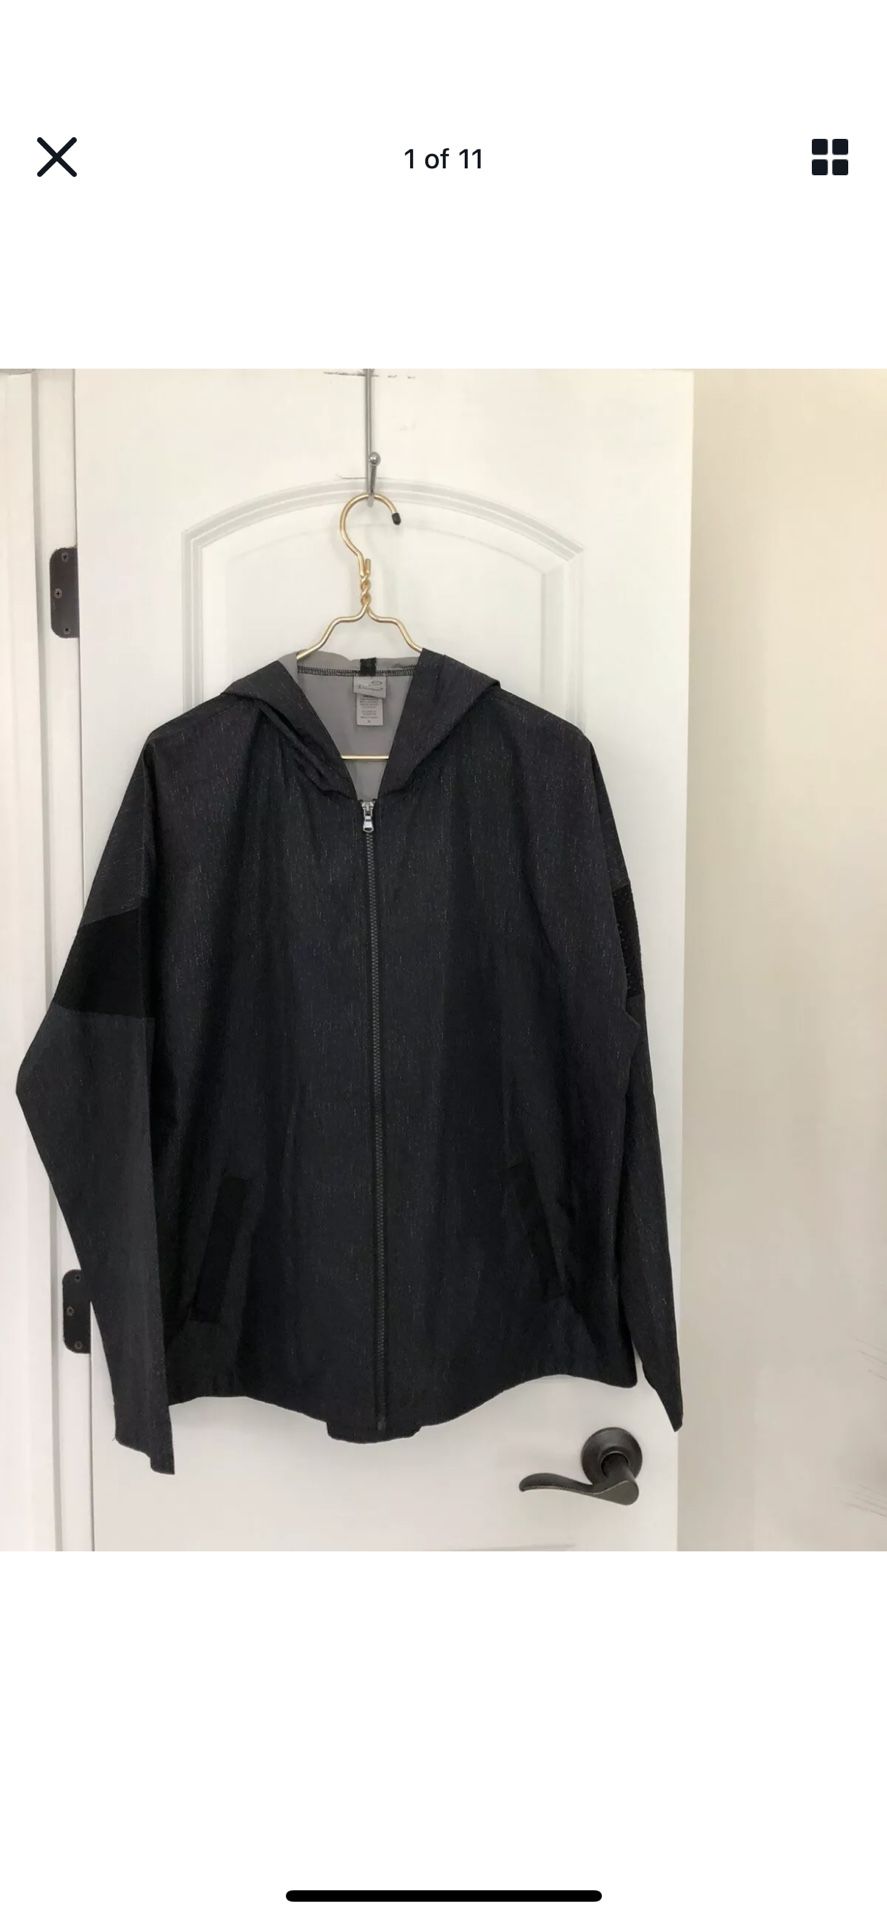 Champion Black Zip-Up Hooded Windbreaker w/ Mesh Cut Out On Sleeves Size X-Large